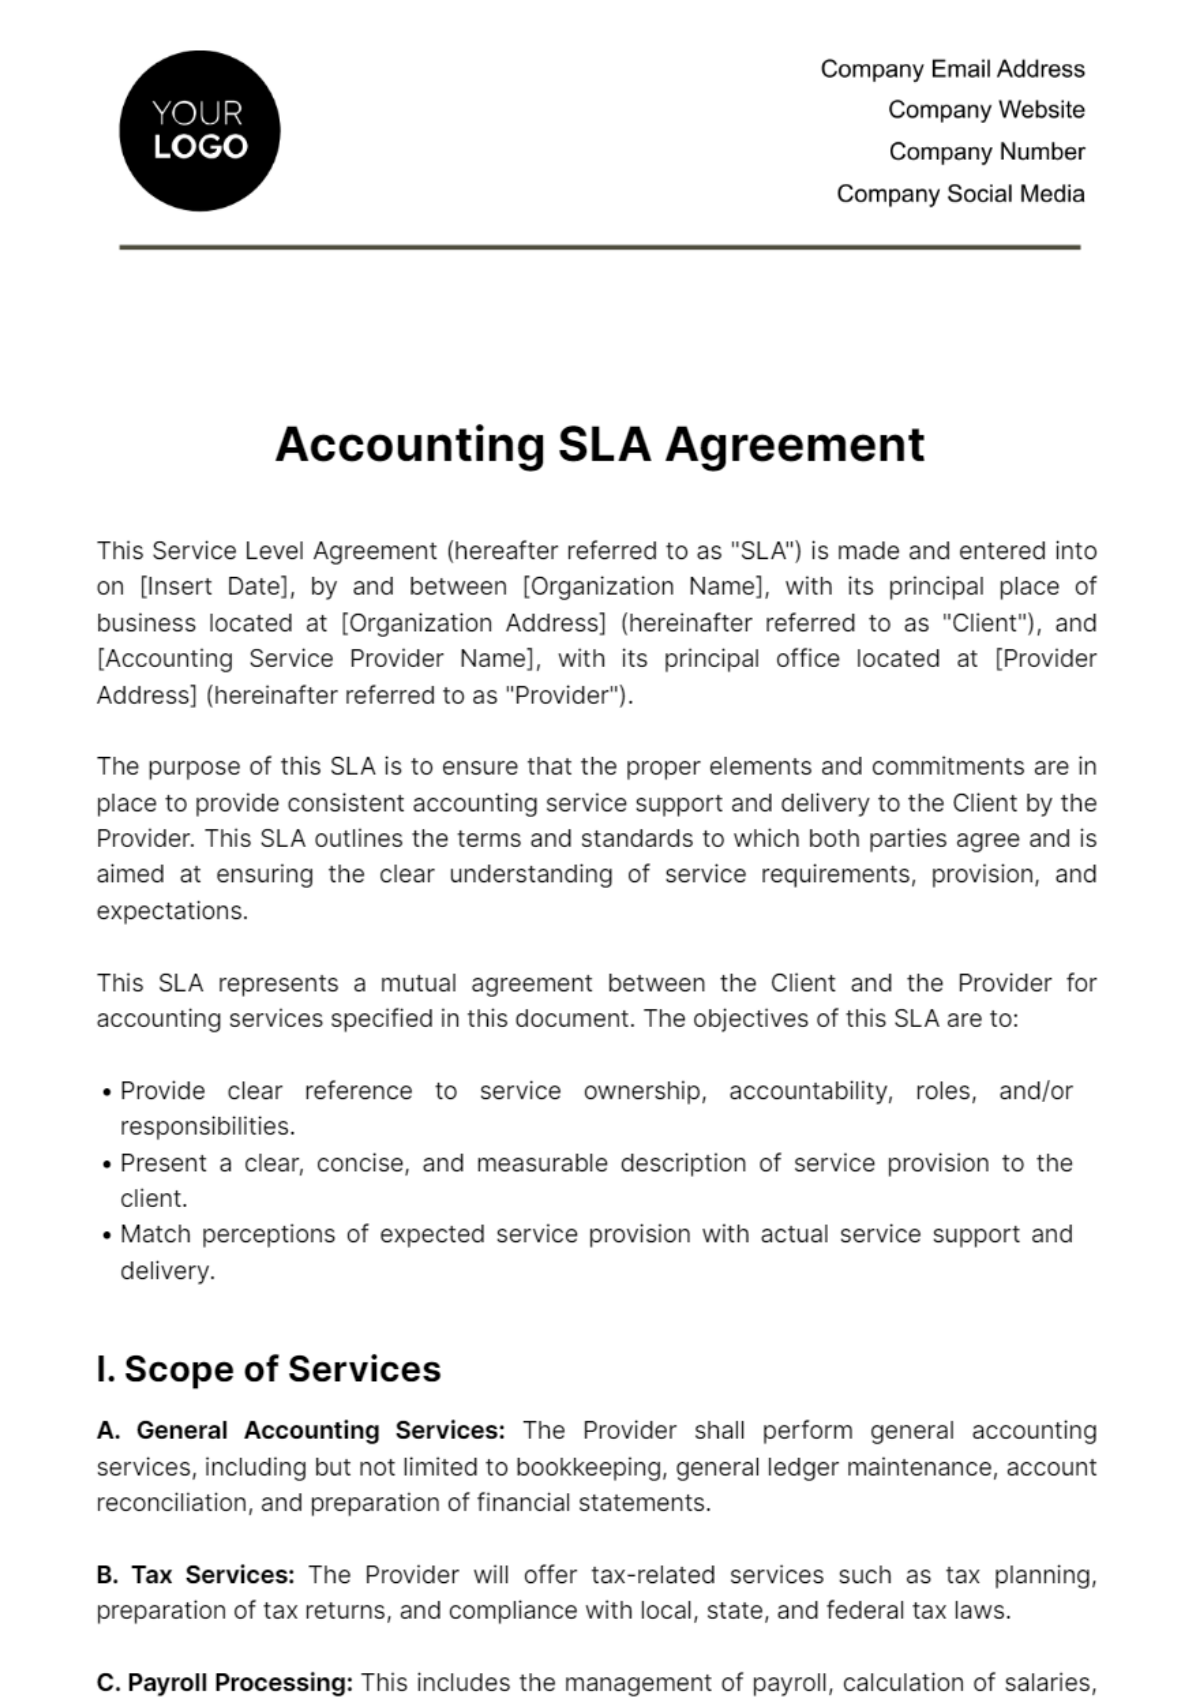 Free Accounting SLA Agreement Template